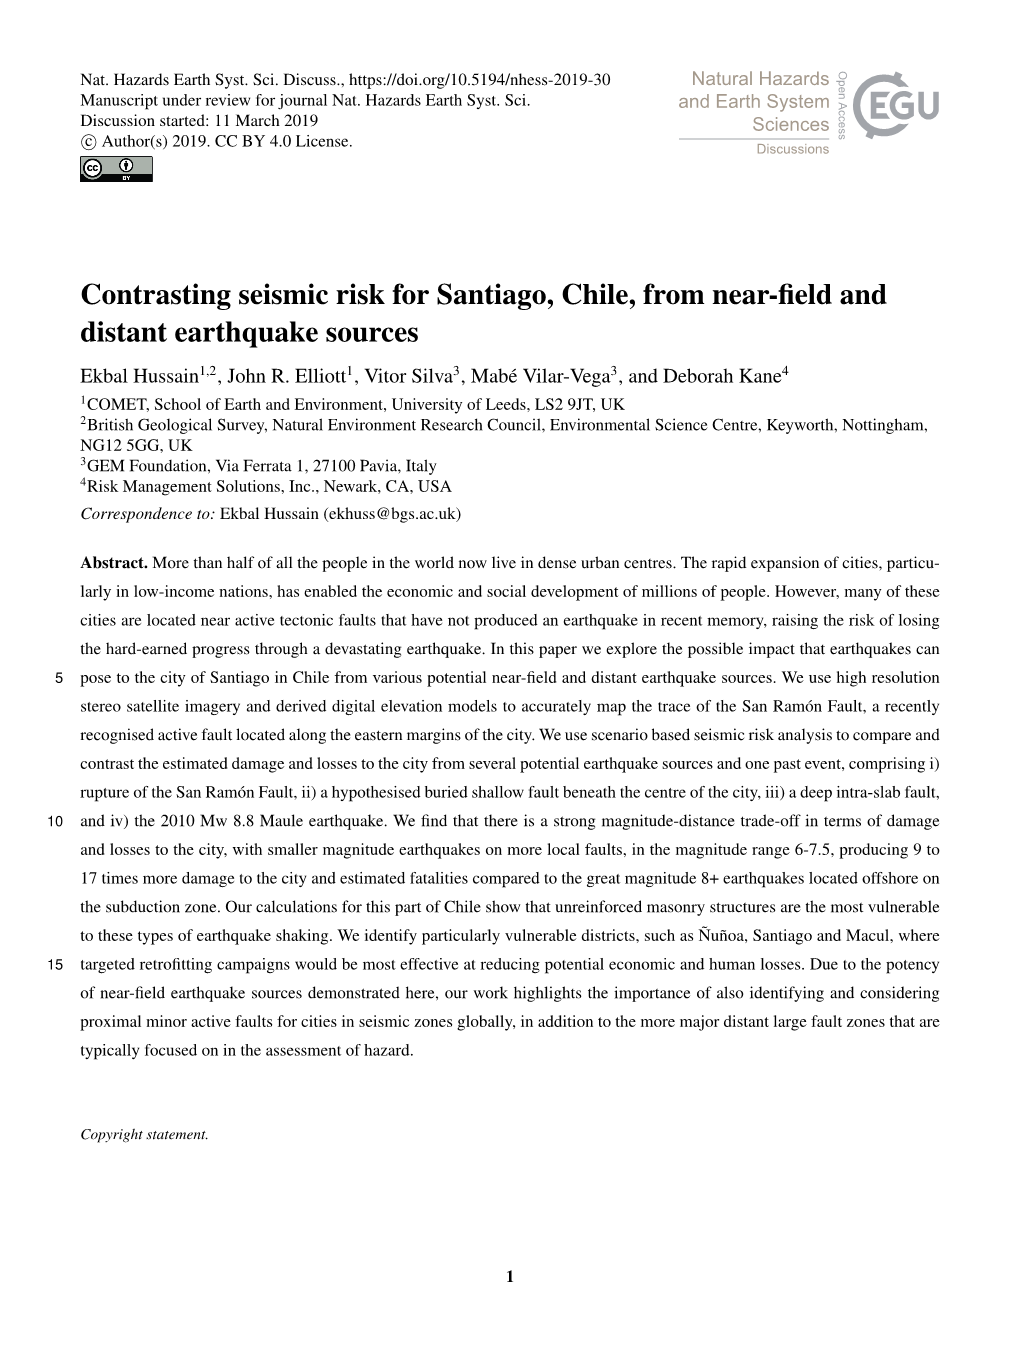 Contrasting Seismic Risk for Santiago, Chile, from Near-Field And